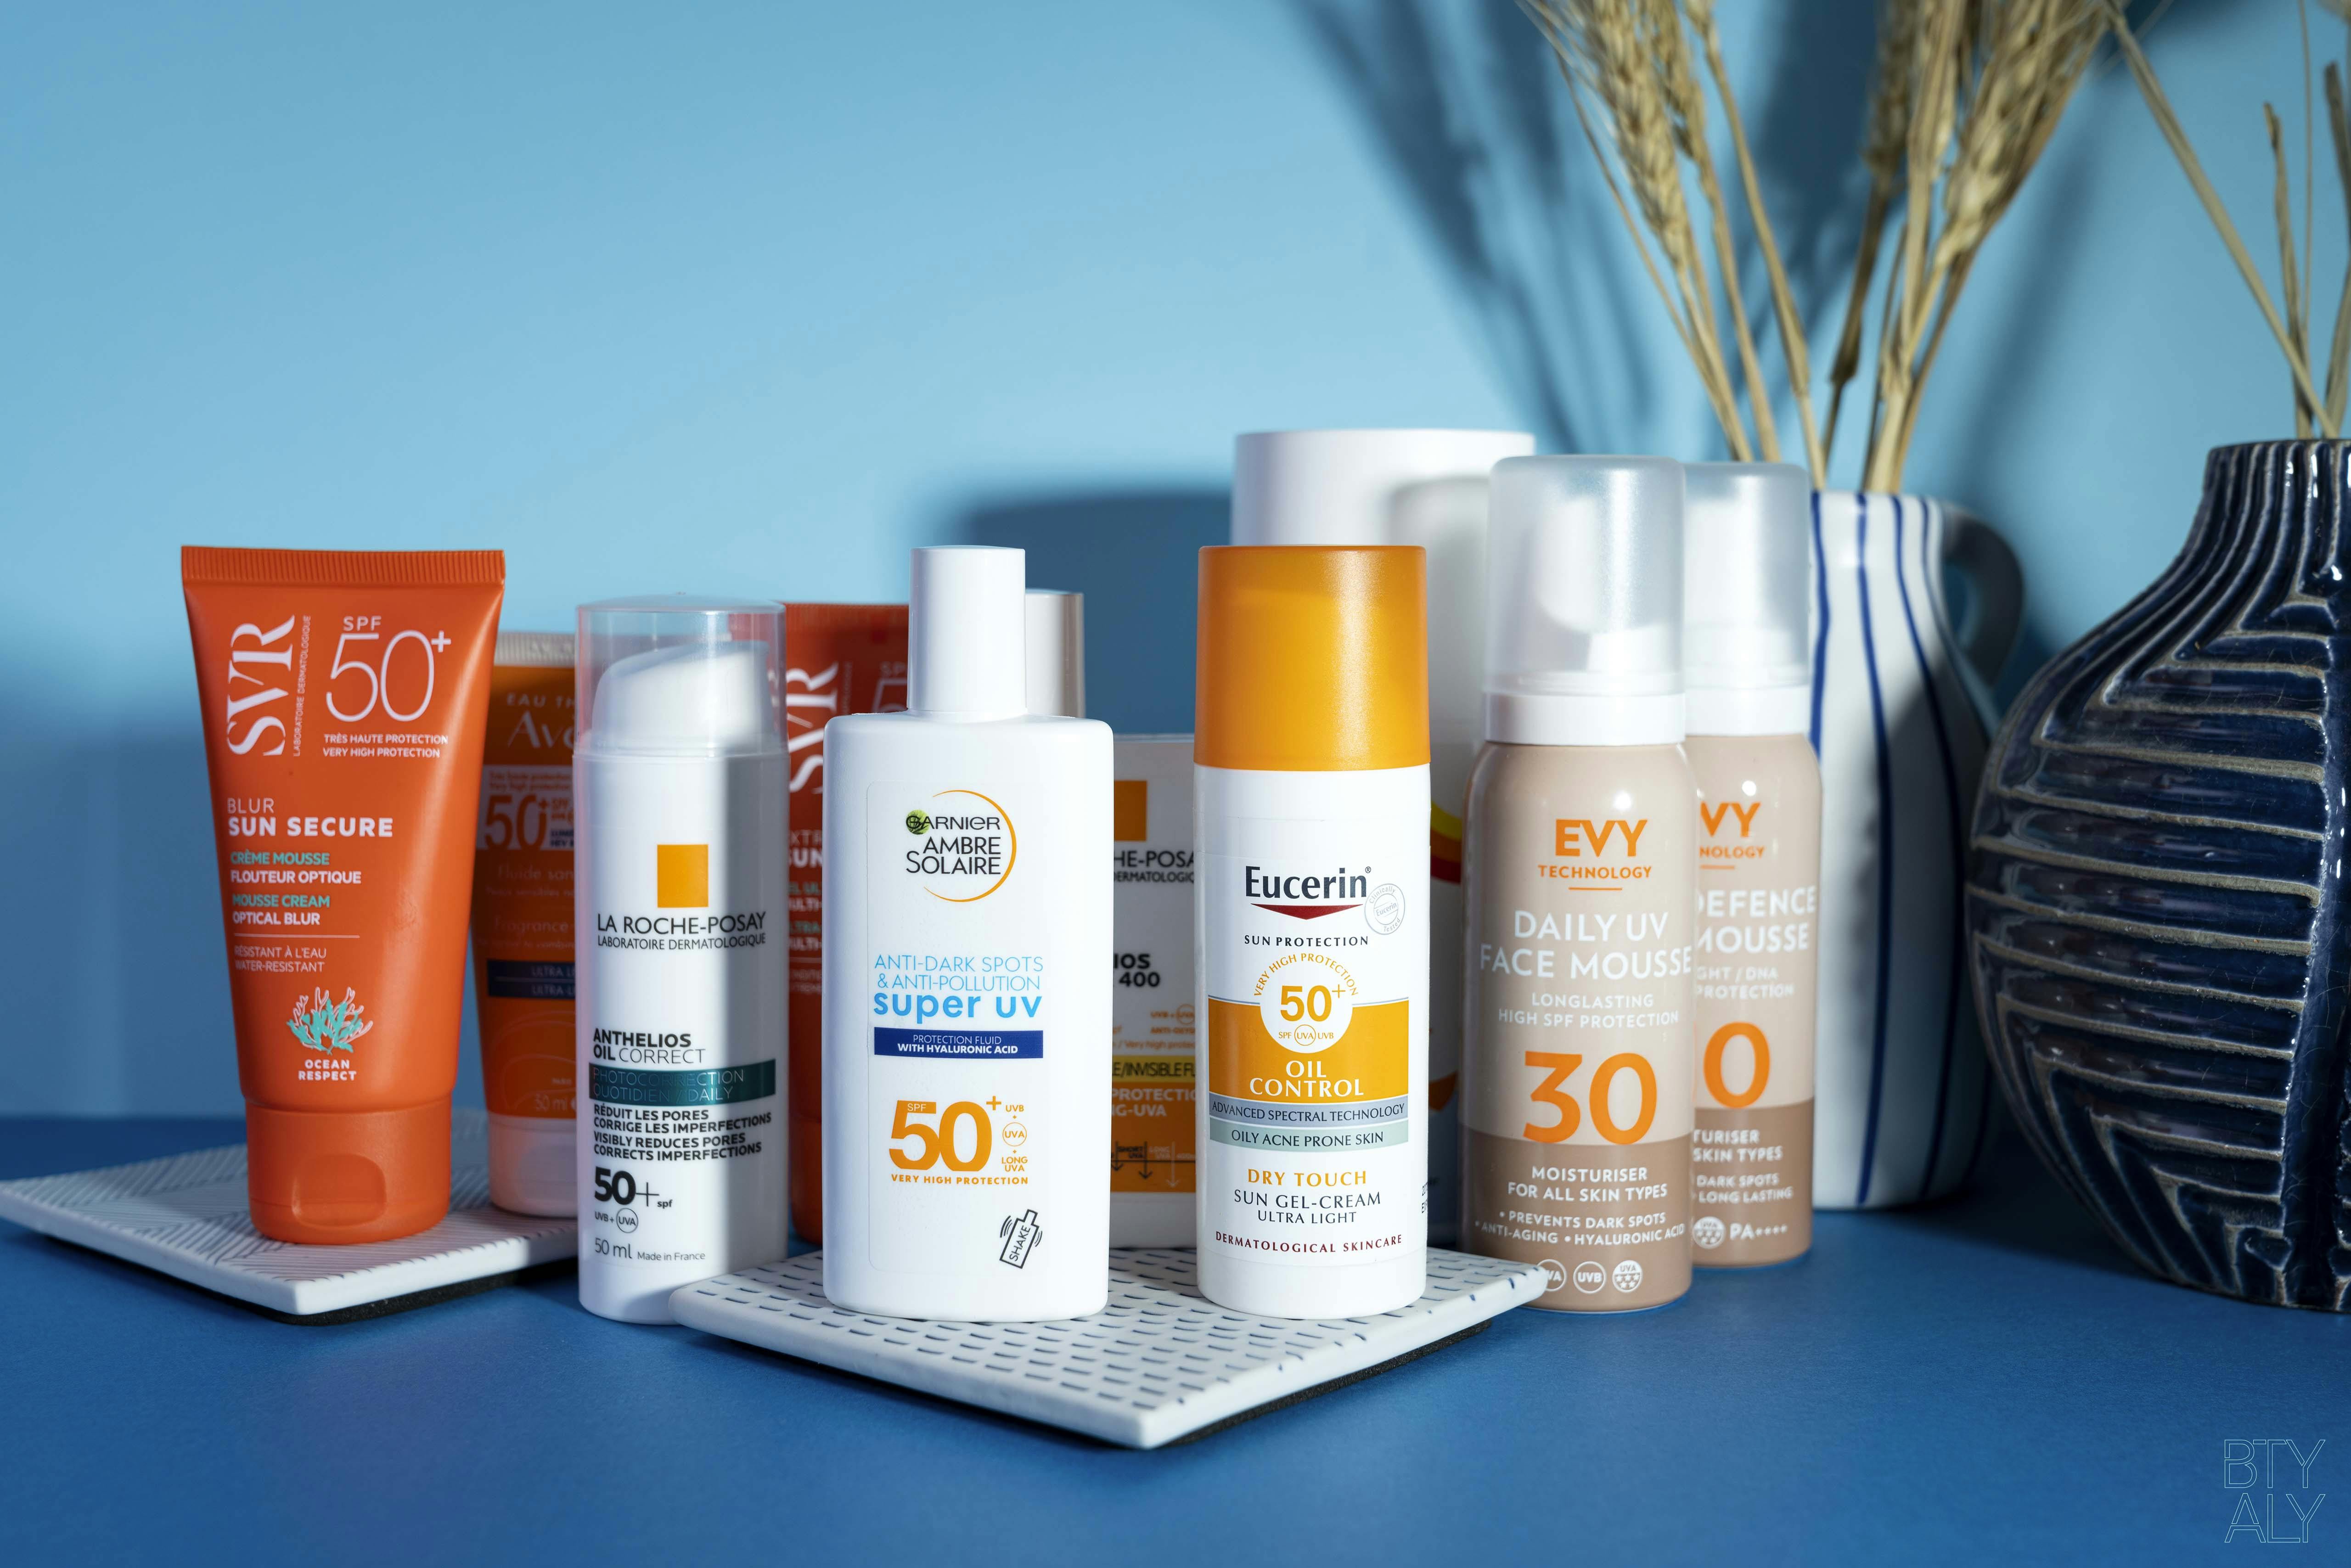 Sunscreen: Buy Everyday Face Sunscreen SPF 50+ with Multi-Protection